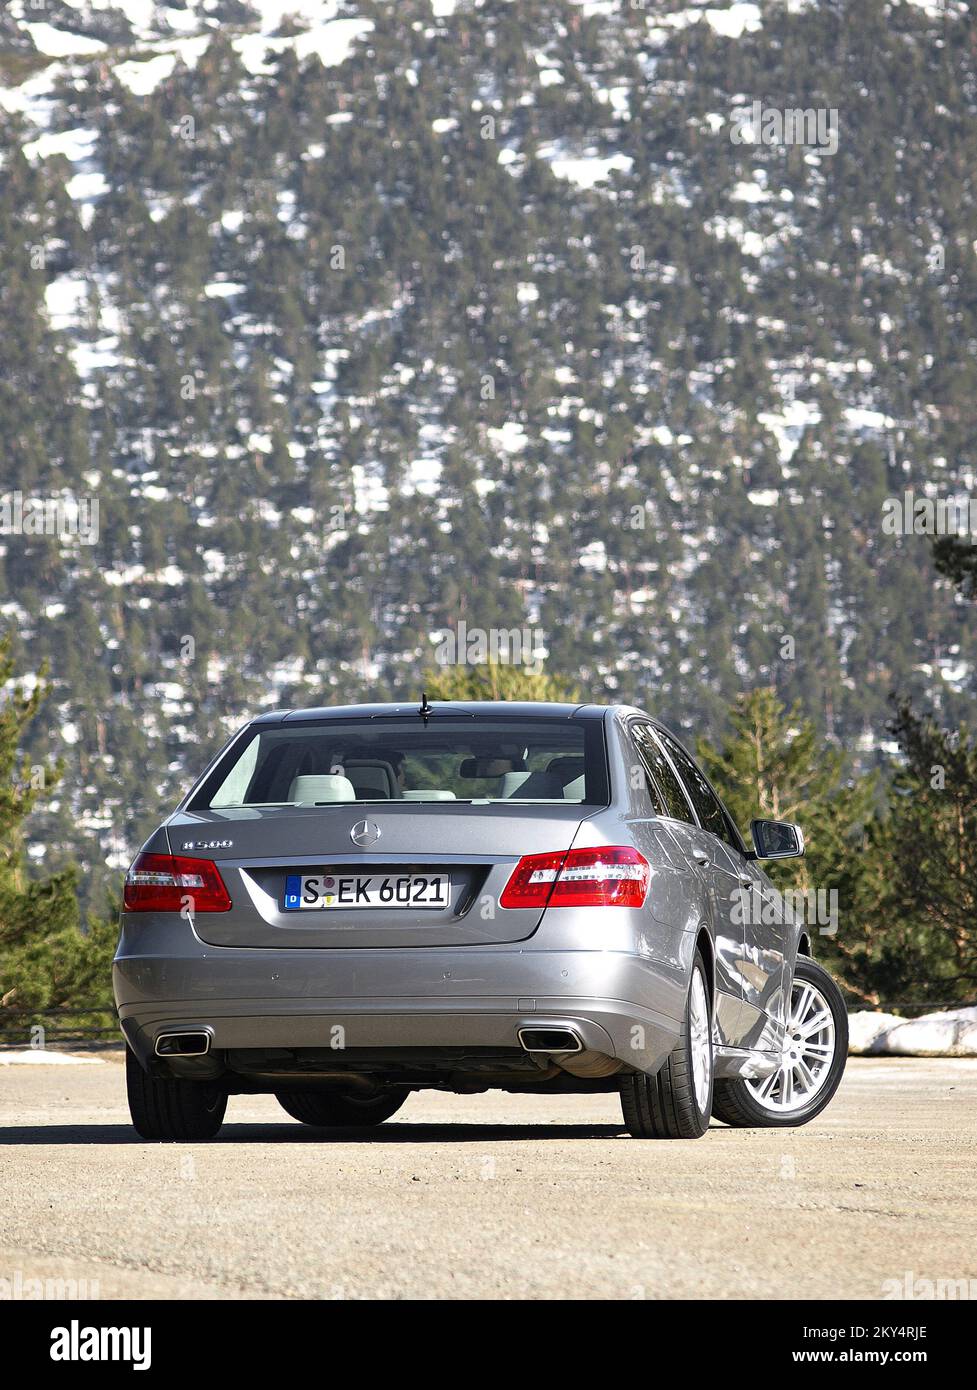 International presentation of the new Mercedes E-class. The new E-Class delivers more than 20 technical improvements, among which self-braking and stopping the car in front of obstacles, adaptive tempomat, turning lights and the automatic raising and lowering of the long, dead angle sensor, the monitoring of drowsy drivers. Stock Photo